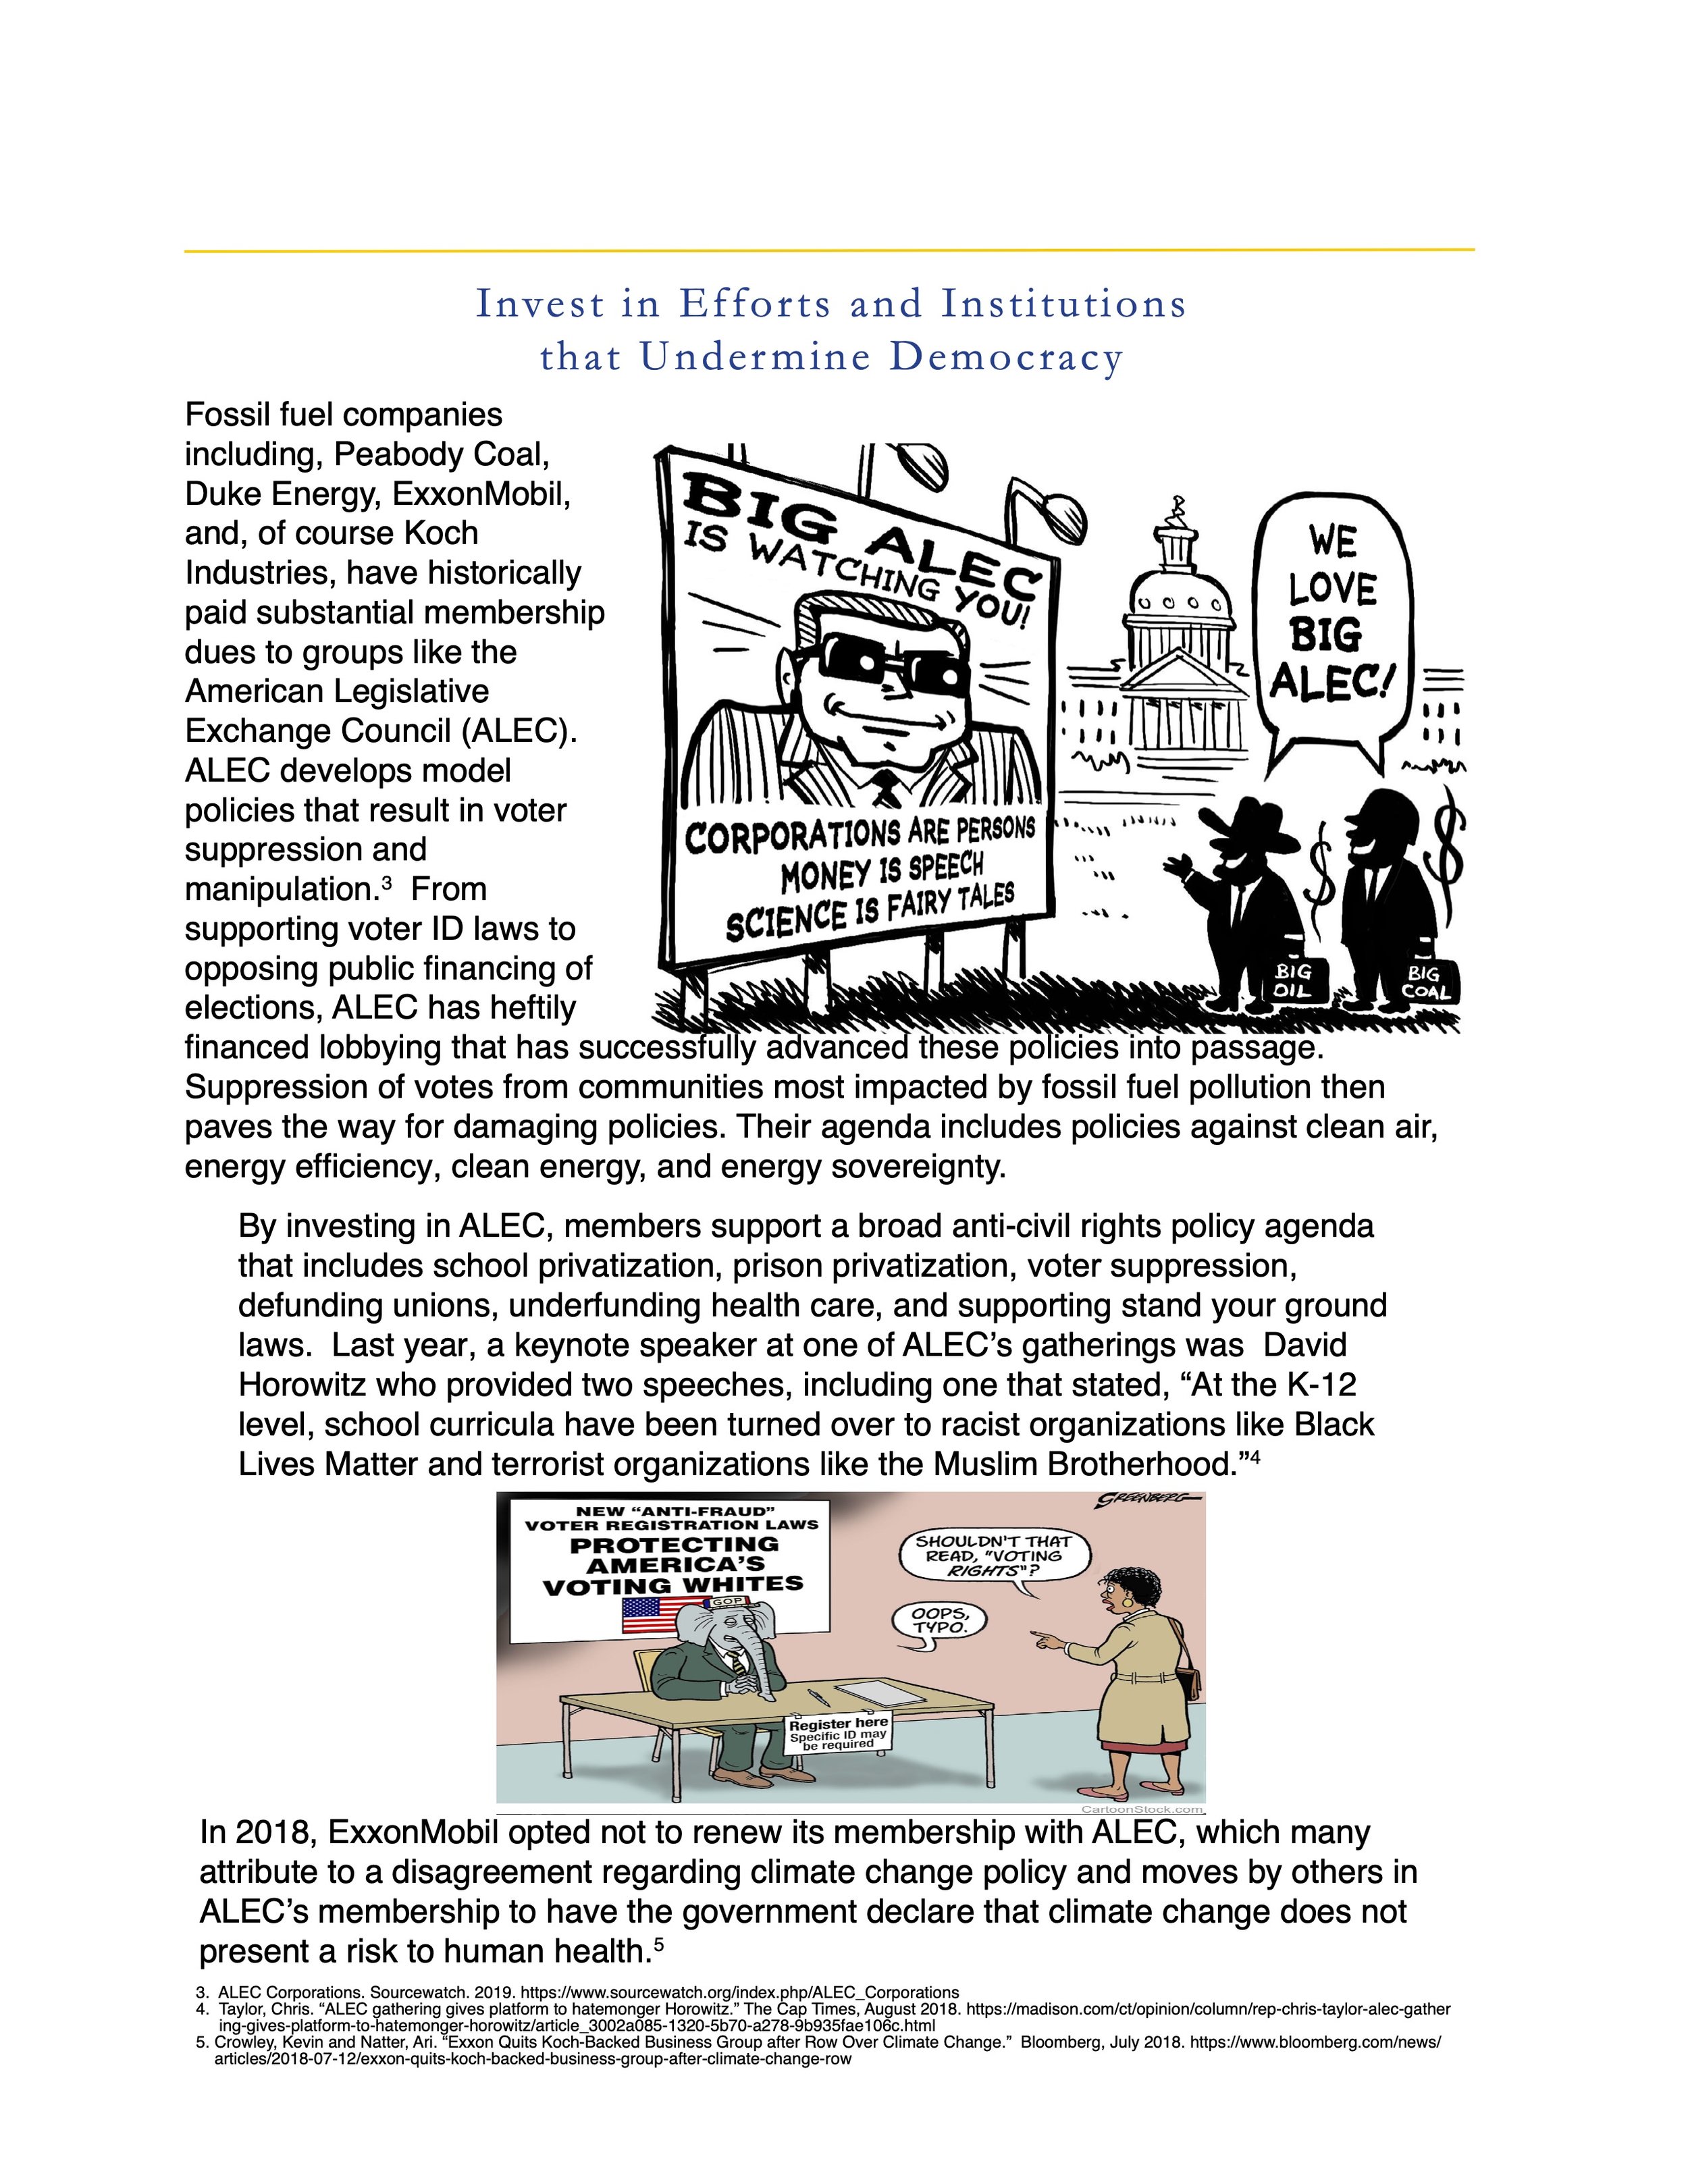 Fossil-Fueled-Foolery-An-Illustrated-Primer-on-the-Top-10-Manipulation-Tactics-of-the-Fossil-Fuel-Industry 5.jpeg